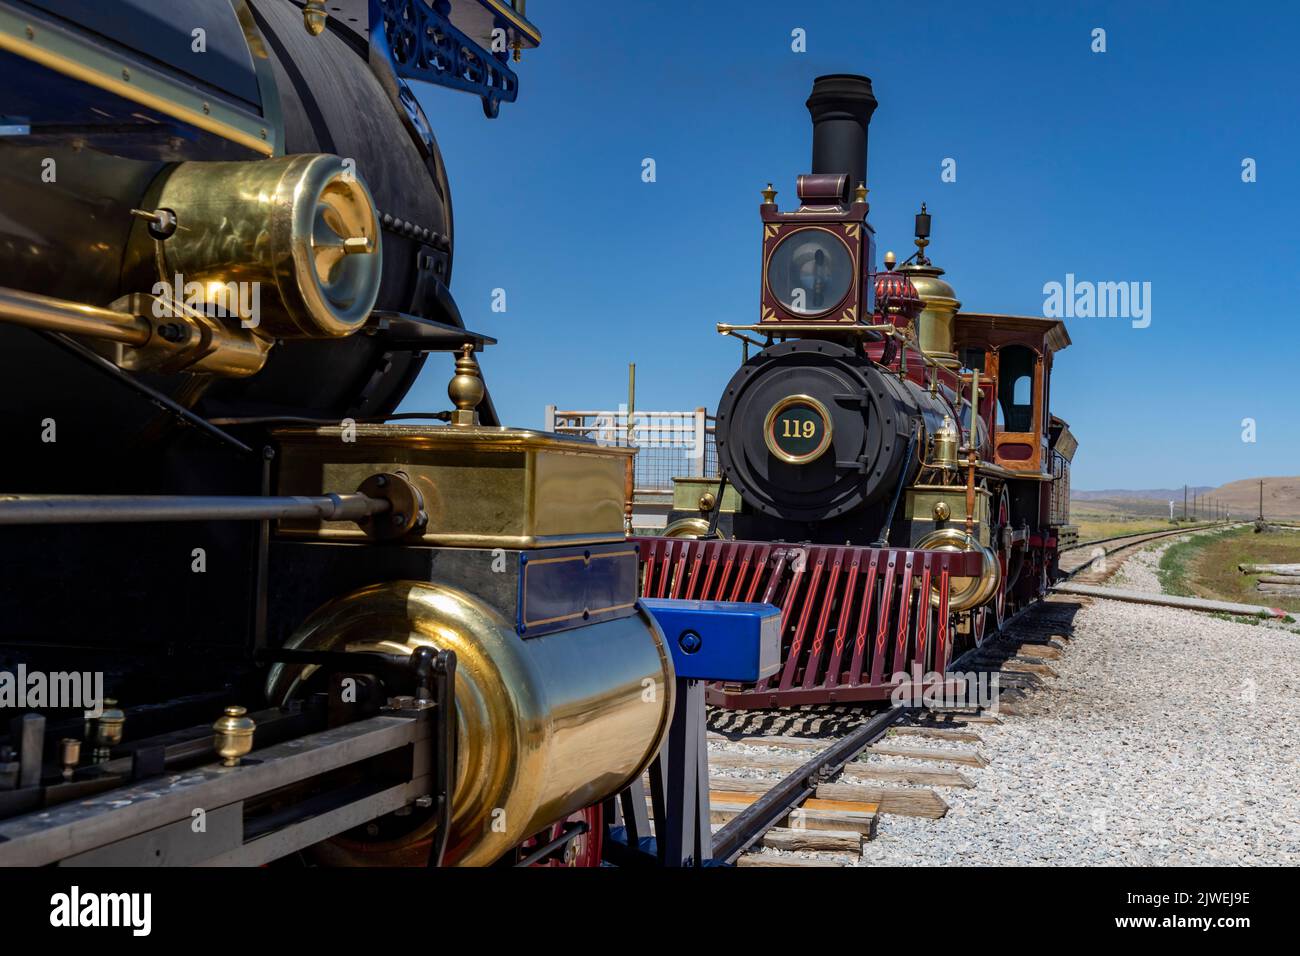 Promontory Summit, Utah - Golden Spike National Historical Park, where the first transcontinental railroad tracks were completed in 1869. Stock Photo